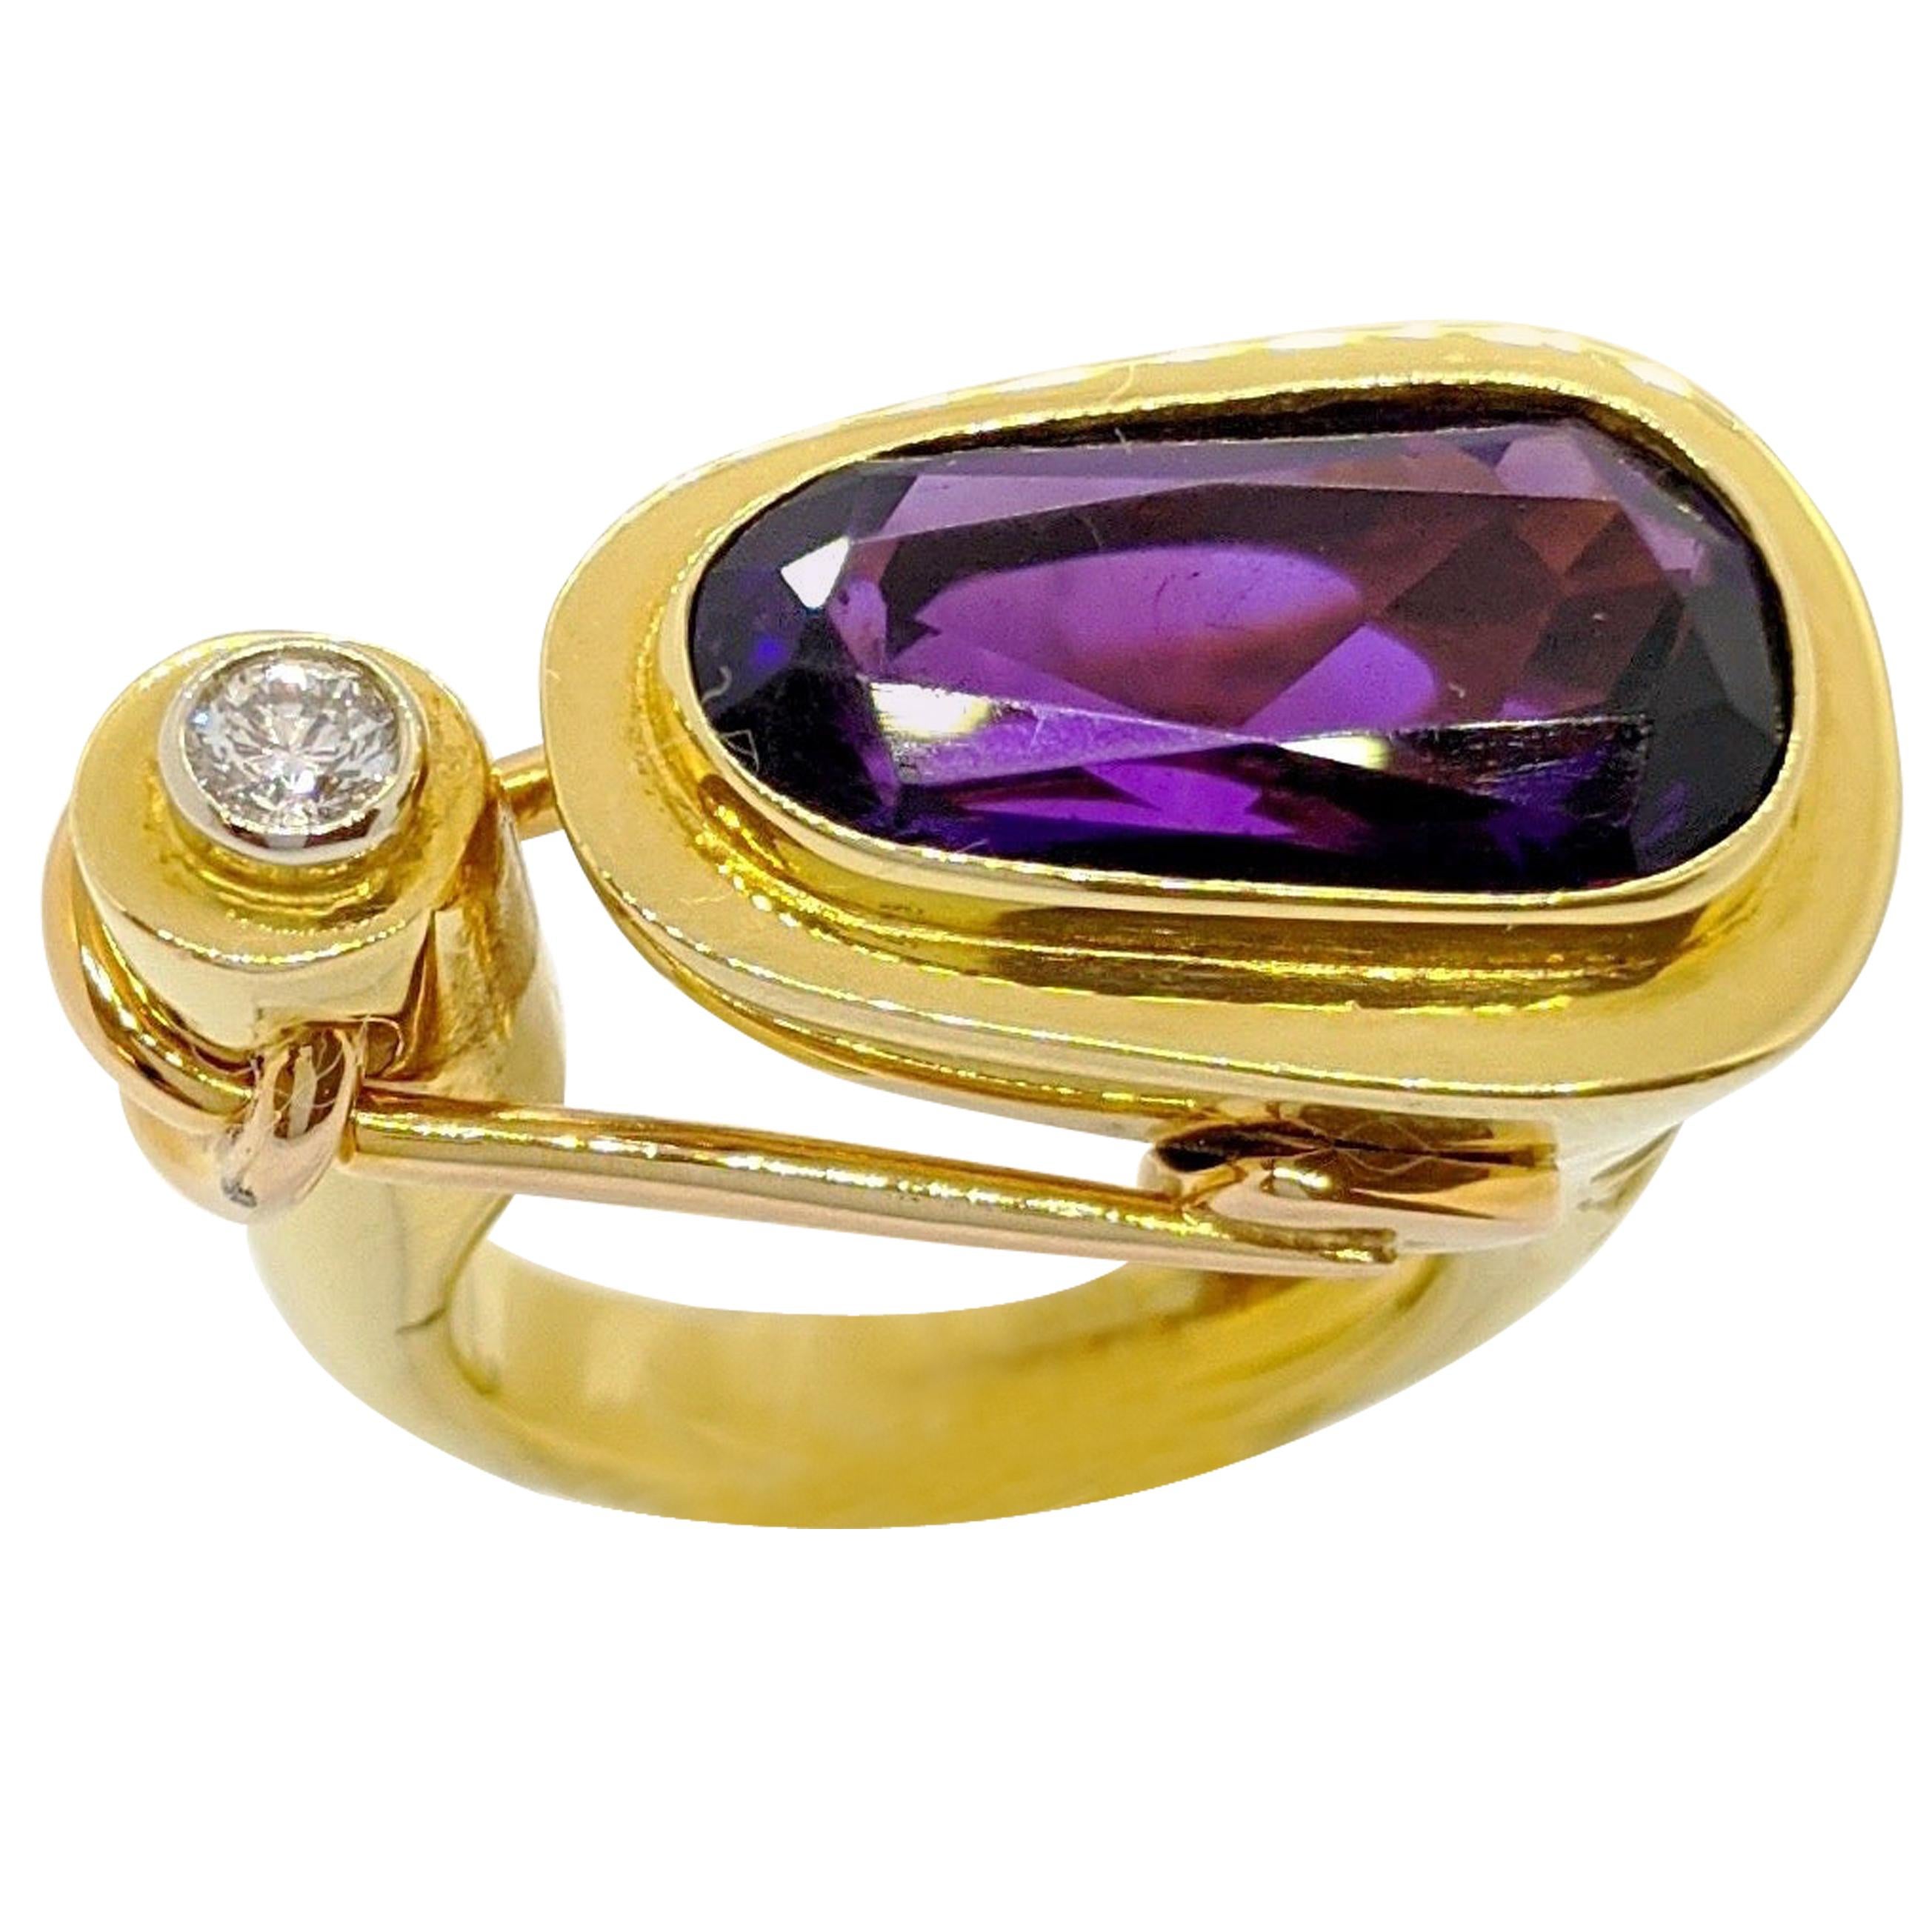 La Nouvelle Bague 18 Karat Yellow and Rose Gold Ring with Amethyst and Diamond